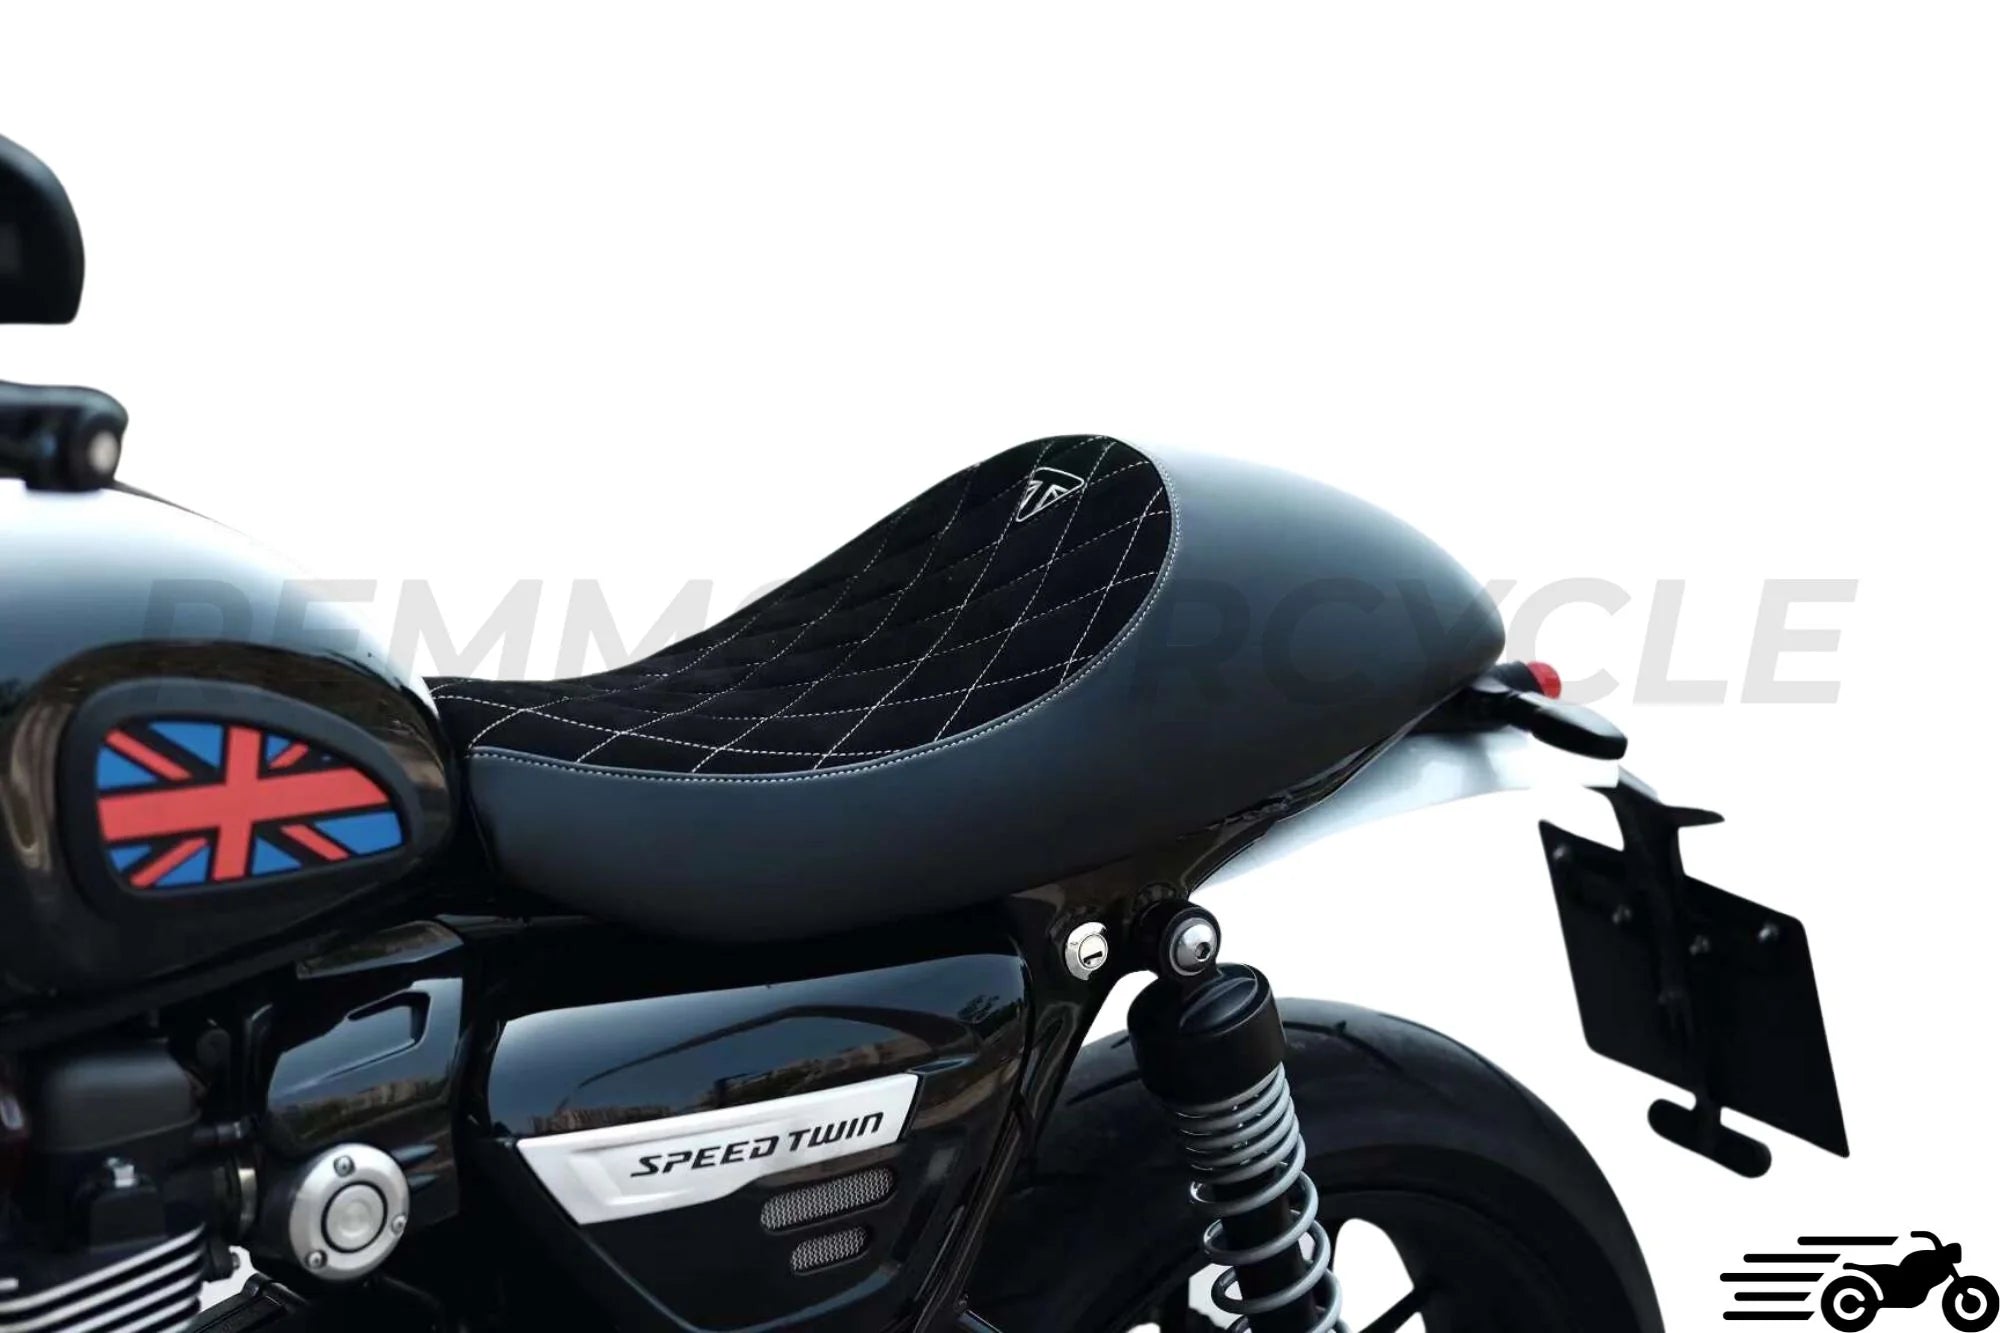 Commodo Moto 2.0 - Remmotorcycle - REMMOTORCYCLE